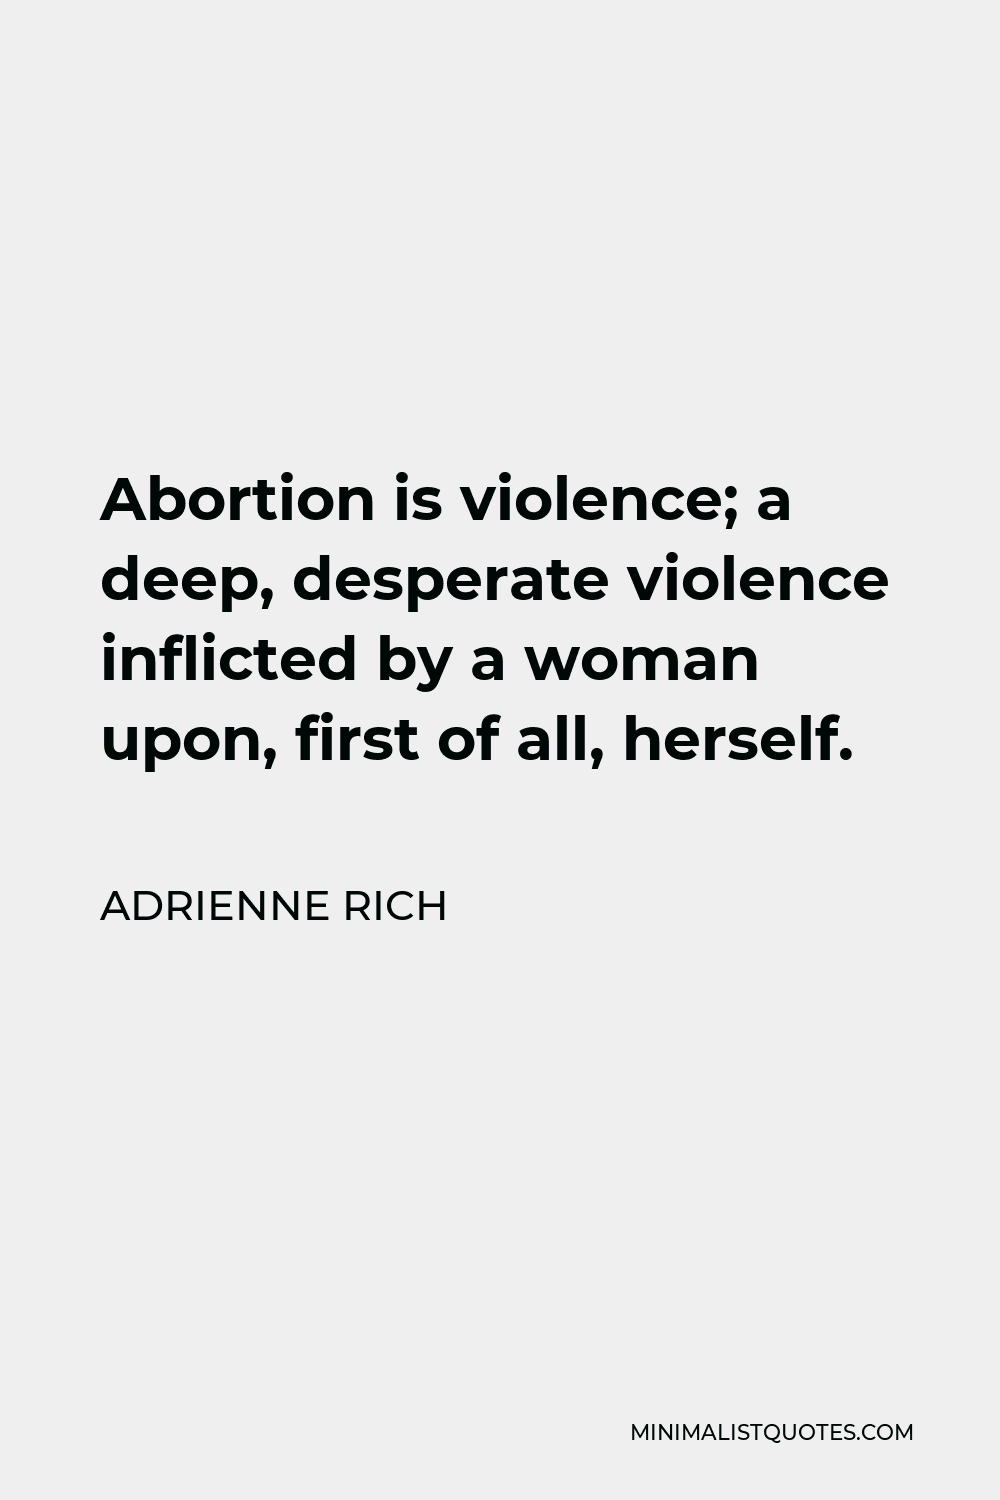 Adrienne Rich Quote - Abortion is violence; a deep, desperate violence inflicted by a woman upon, first of all, herself.